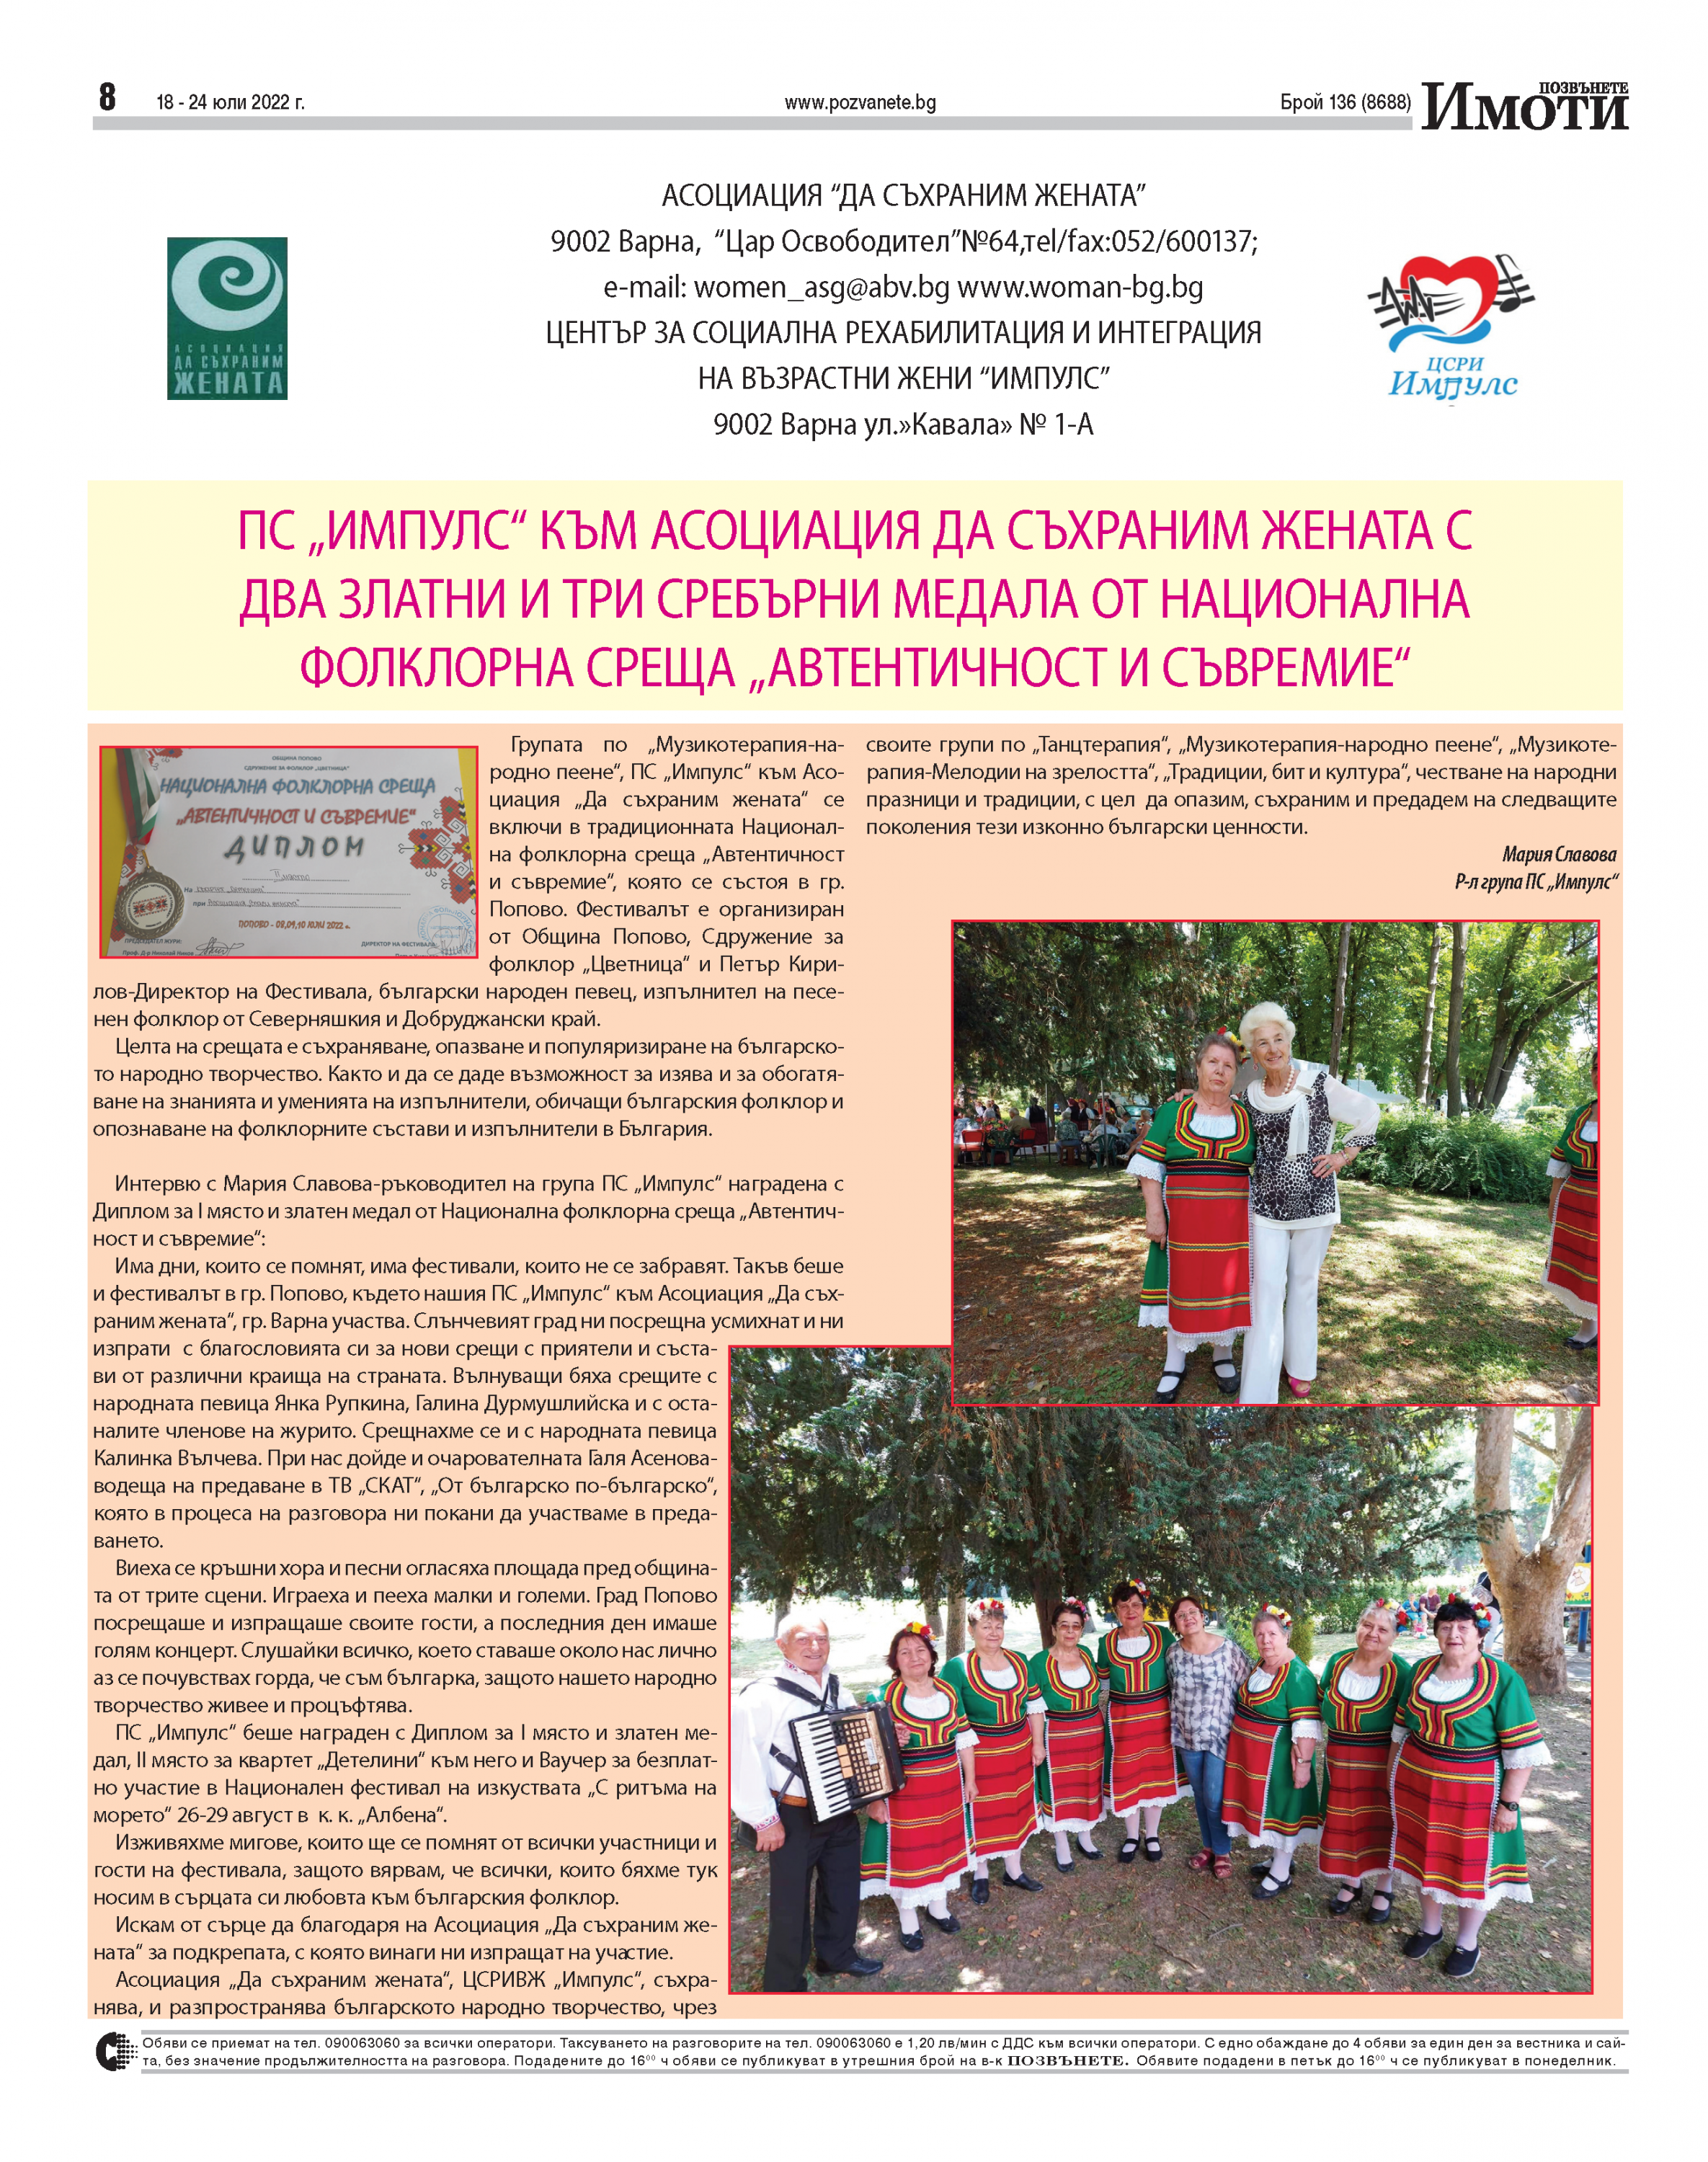 Pages-from-pozvanete-varna-2022-07-18.pdf.png000